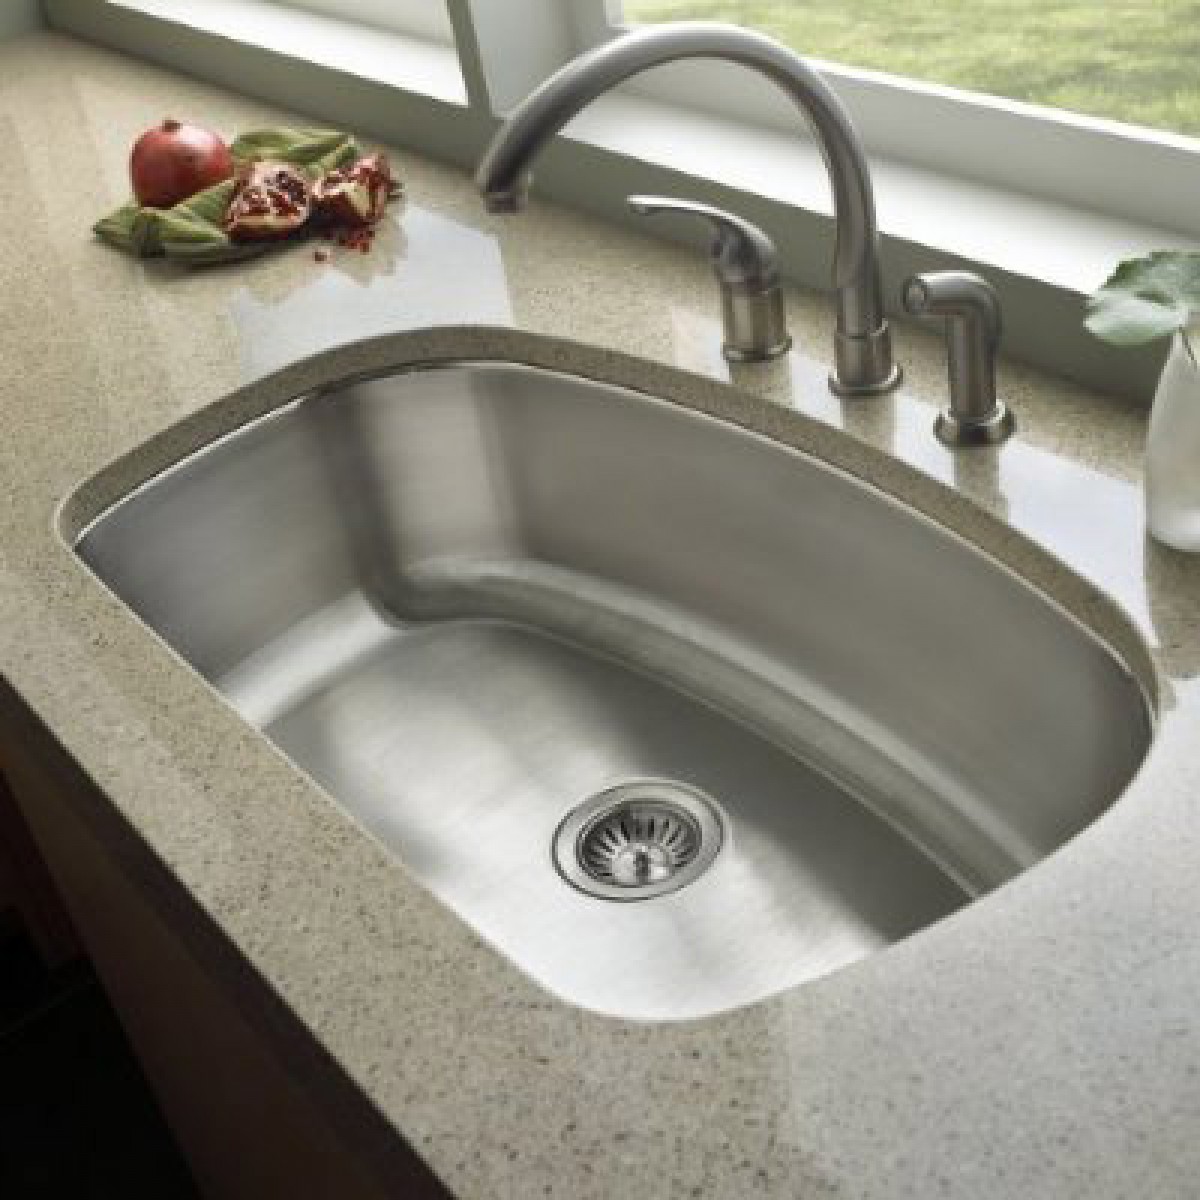 32 Inch Stainless Steel Undermount Curved Single Bowl Kitchen Sink with 32 Inch Stainless Steel Undermount Sink